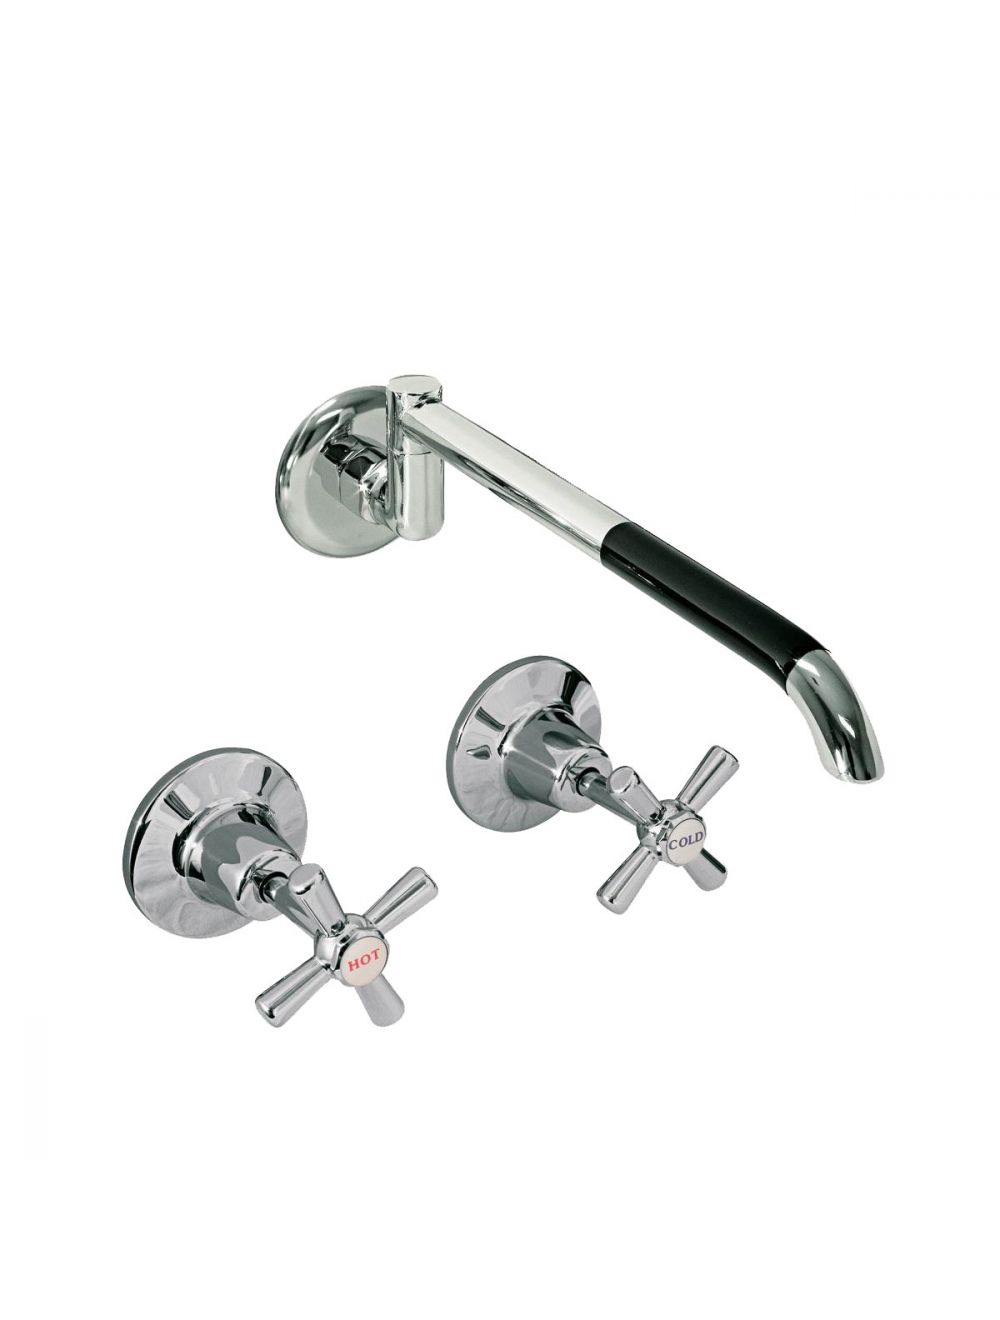 Cleaners Sink Tap Set Cleaners Sink Arm and Wall Stops